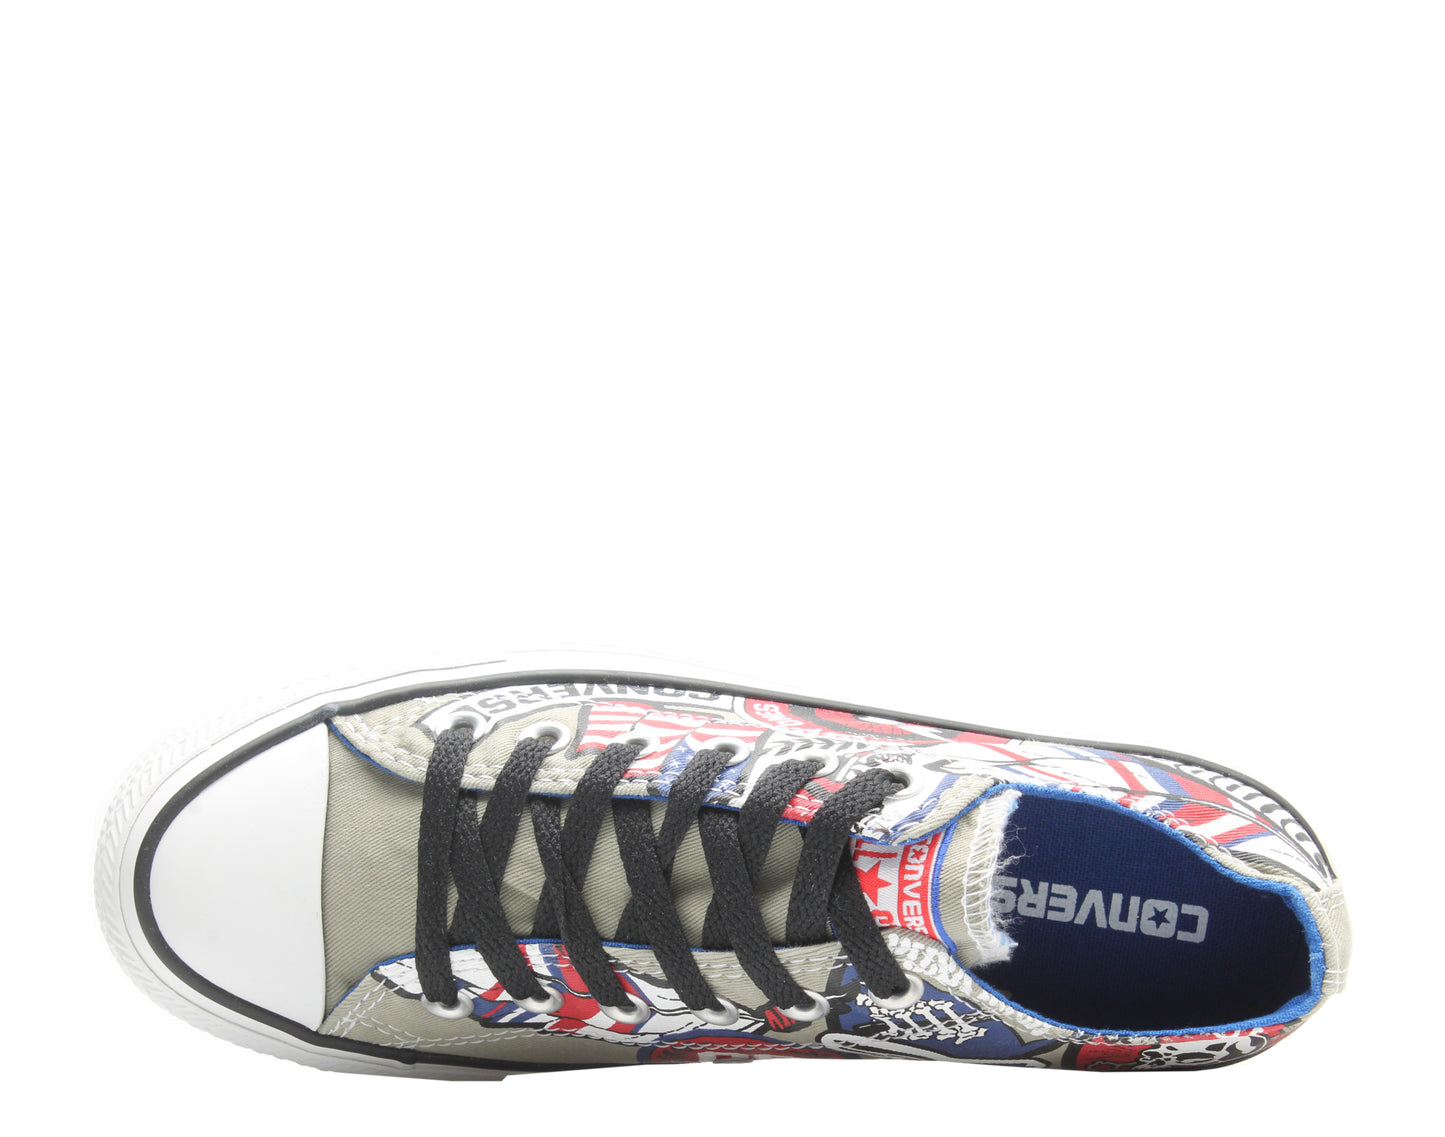 Converse Chuck Taylor All Star Old Biker Ox Low Top Sneakers